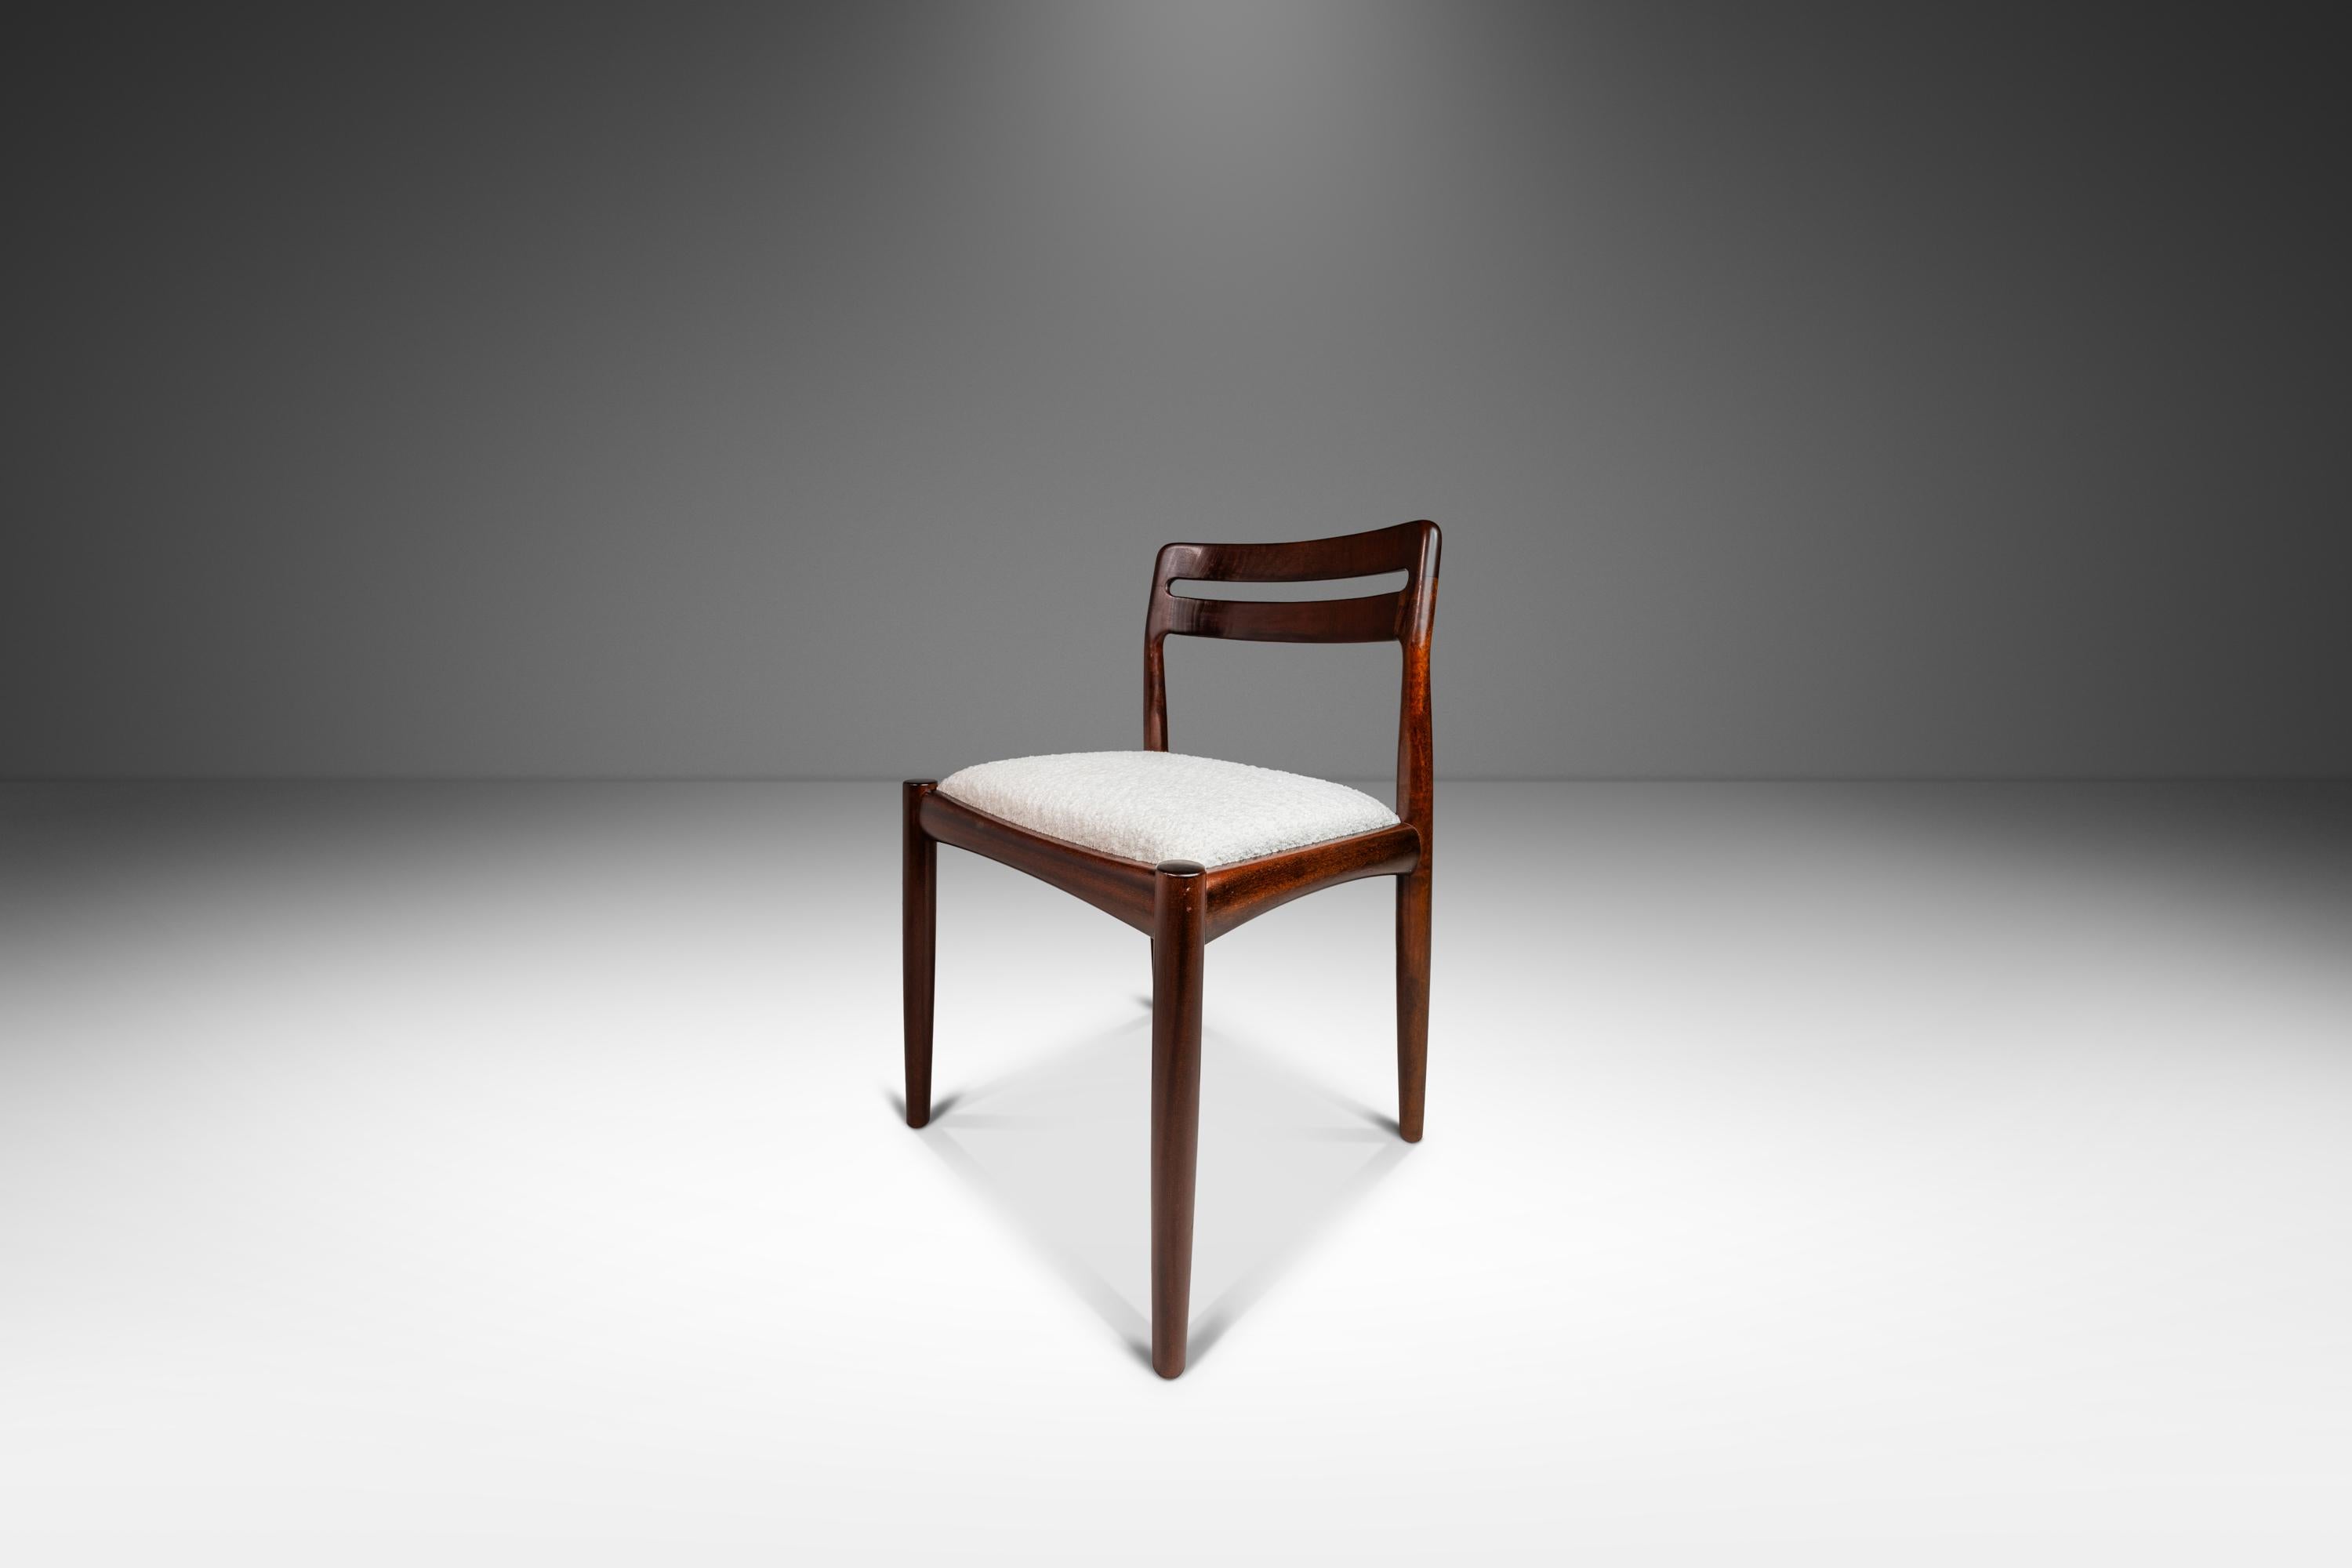 Introducing a rare and limited set of four Model 382 Dining Chairs designed by the influential H.W. Klein for Bramin Møbler. Produced in the mid-1960's this set of Model 382's are constructed from solid mahogany and feature newly upholstered seats